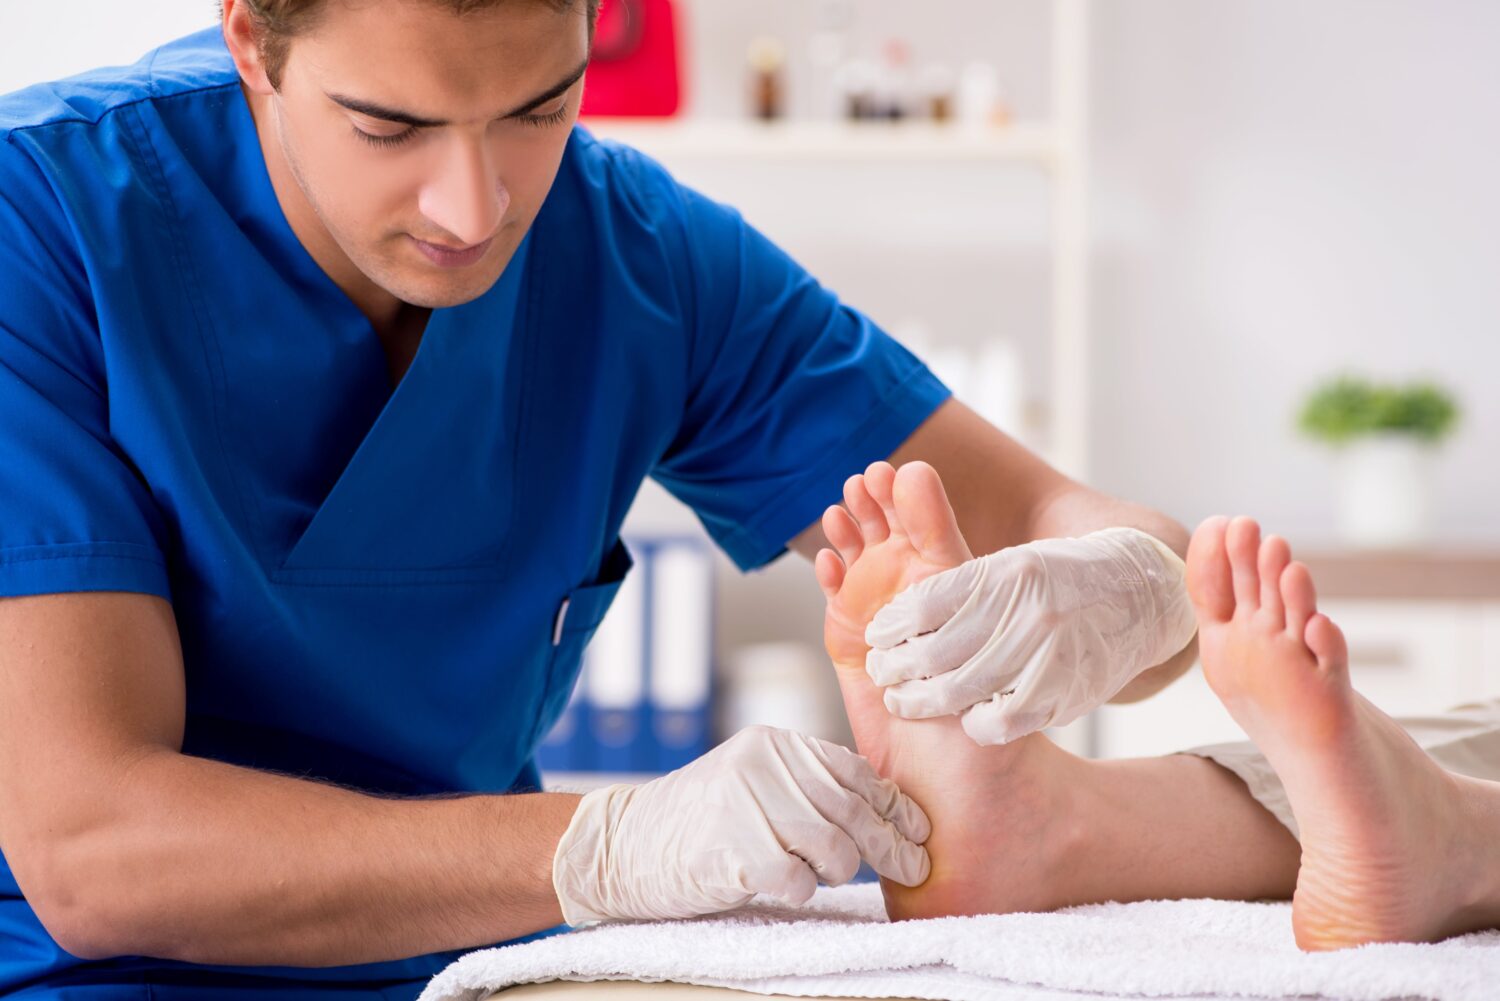 5 Common Foot Problems That Require a Podiatrist